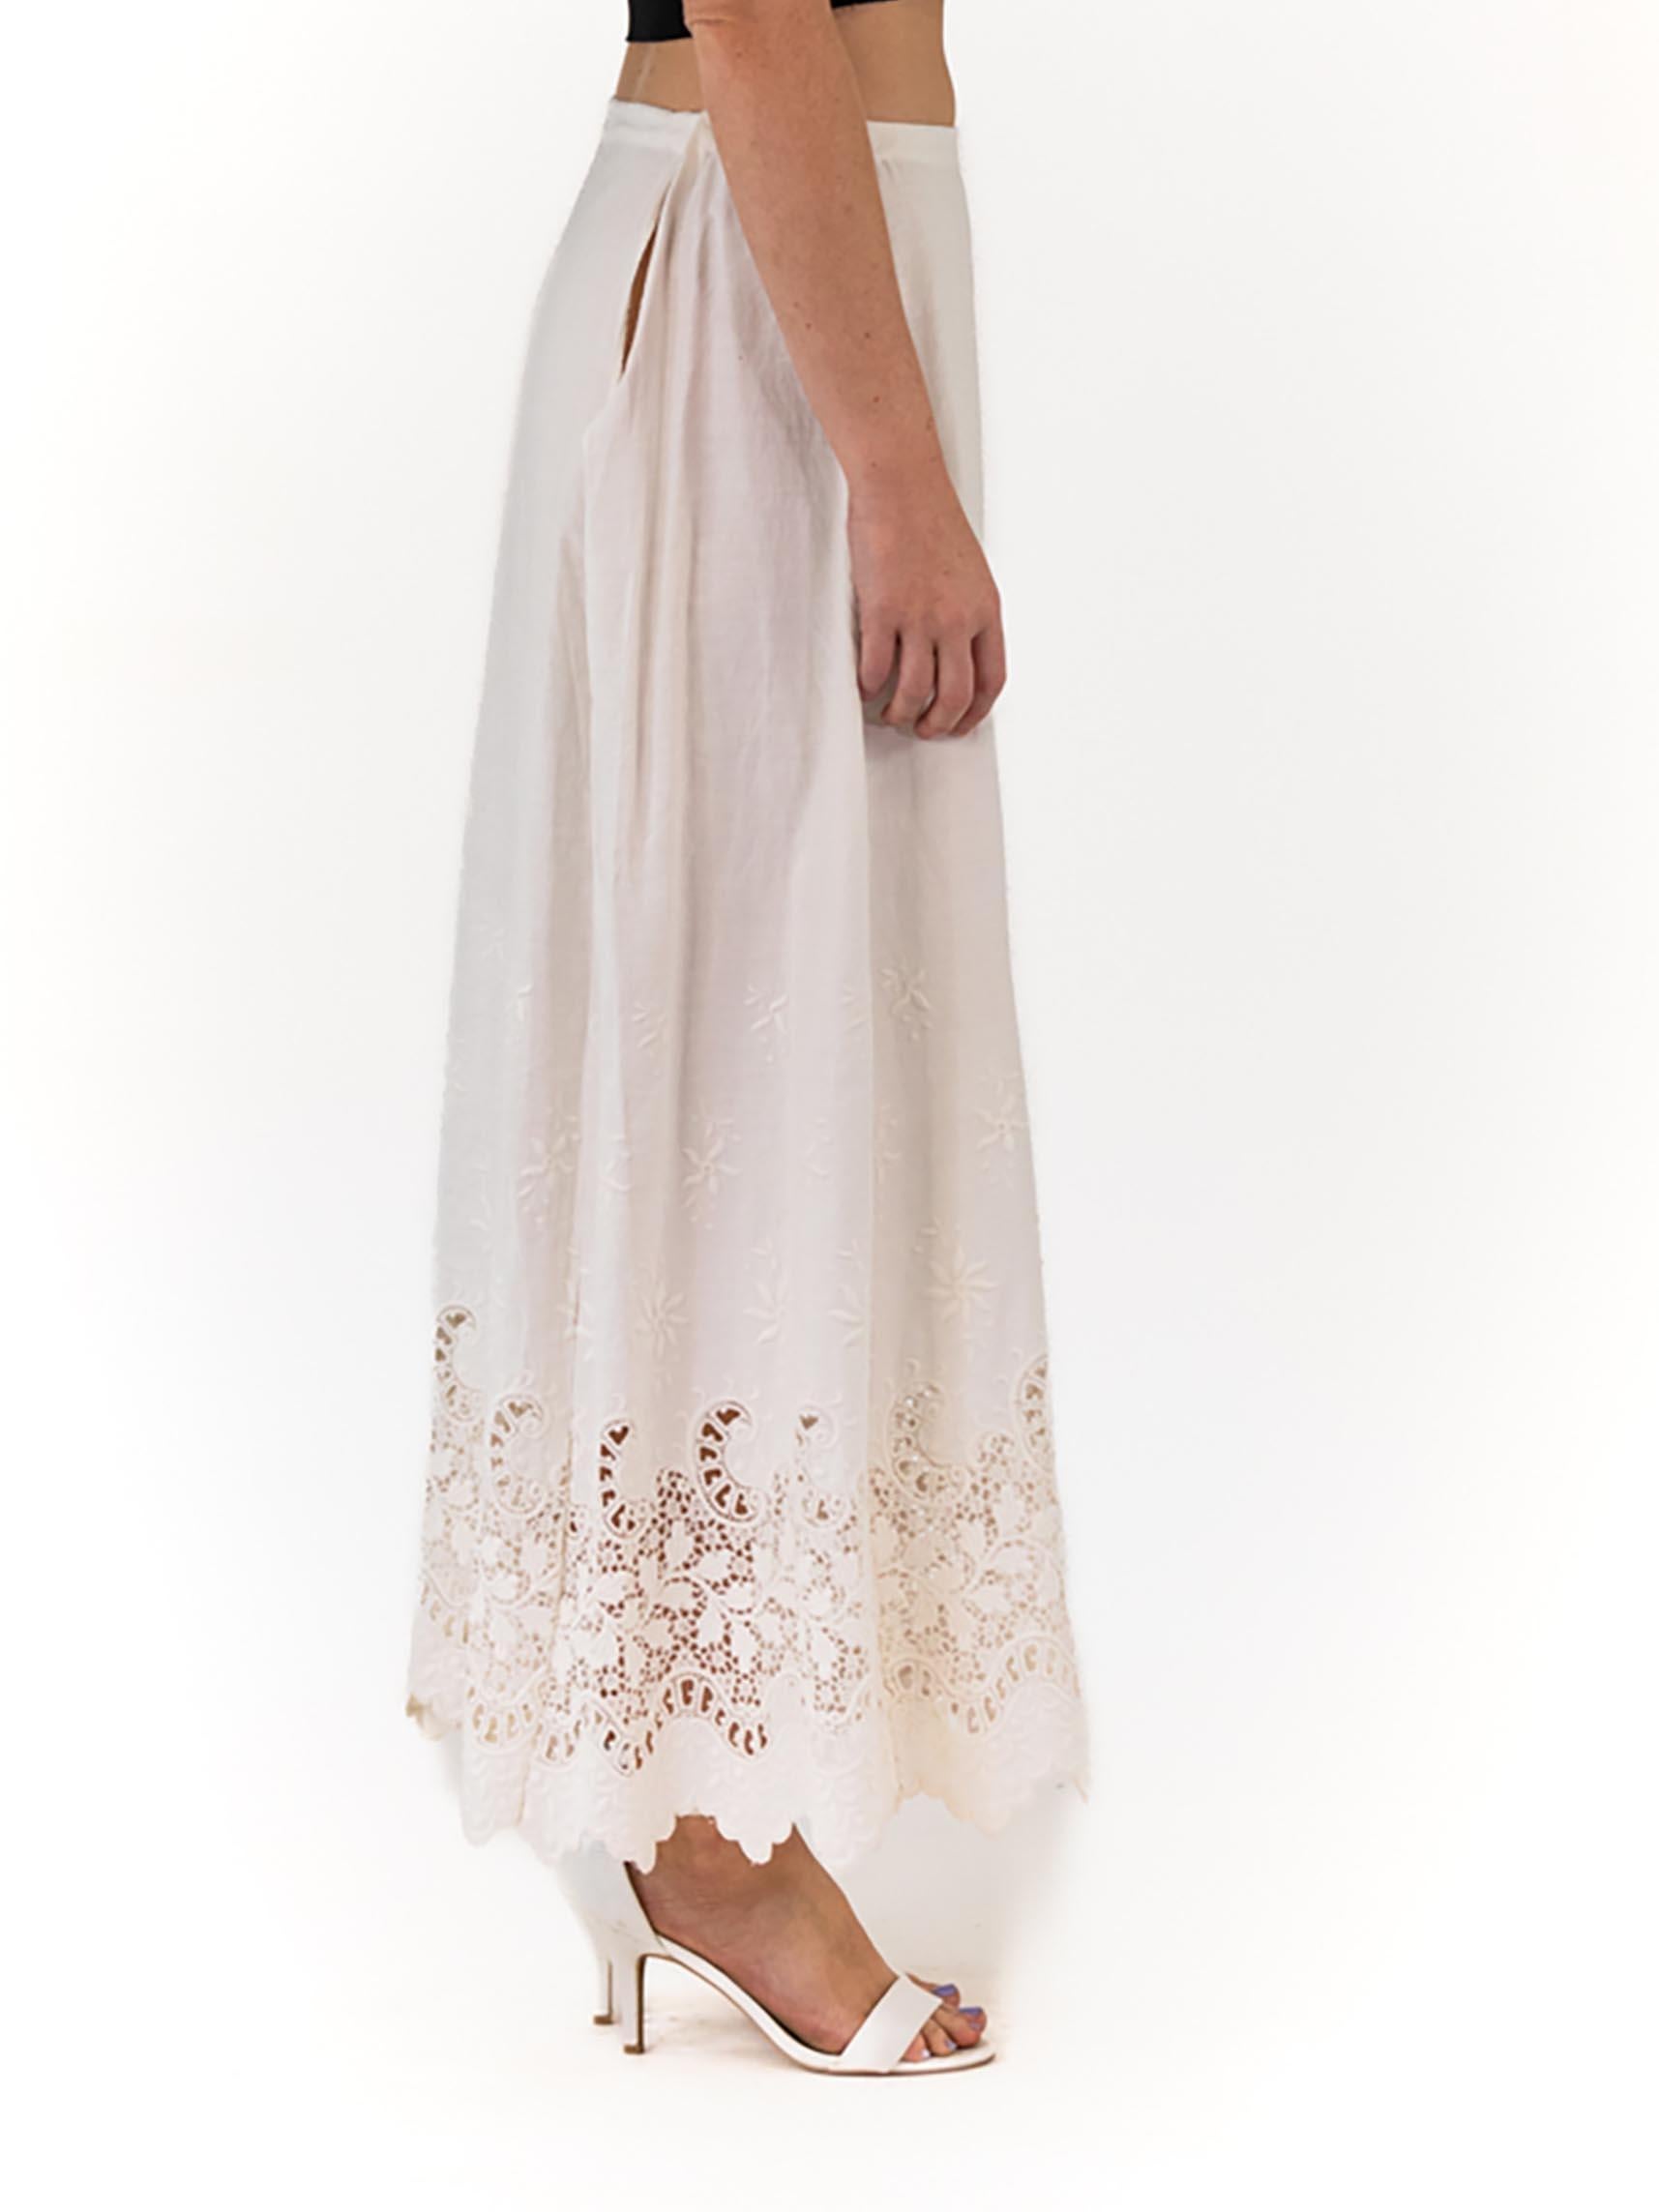 Women's Edwardian White Linen Skirt With Floral Hand Embroidery